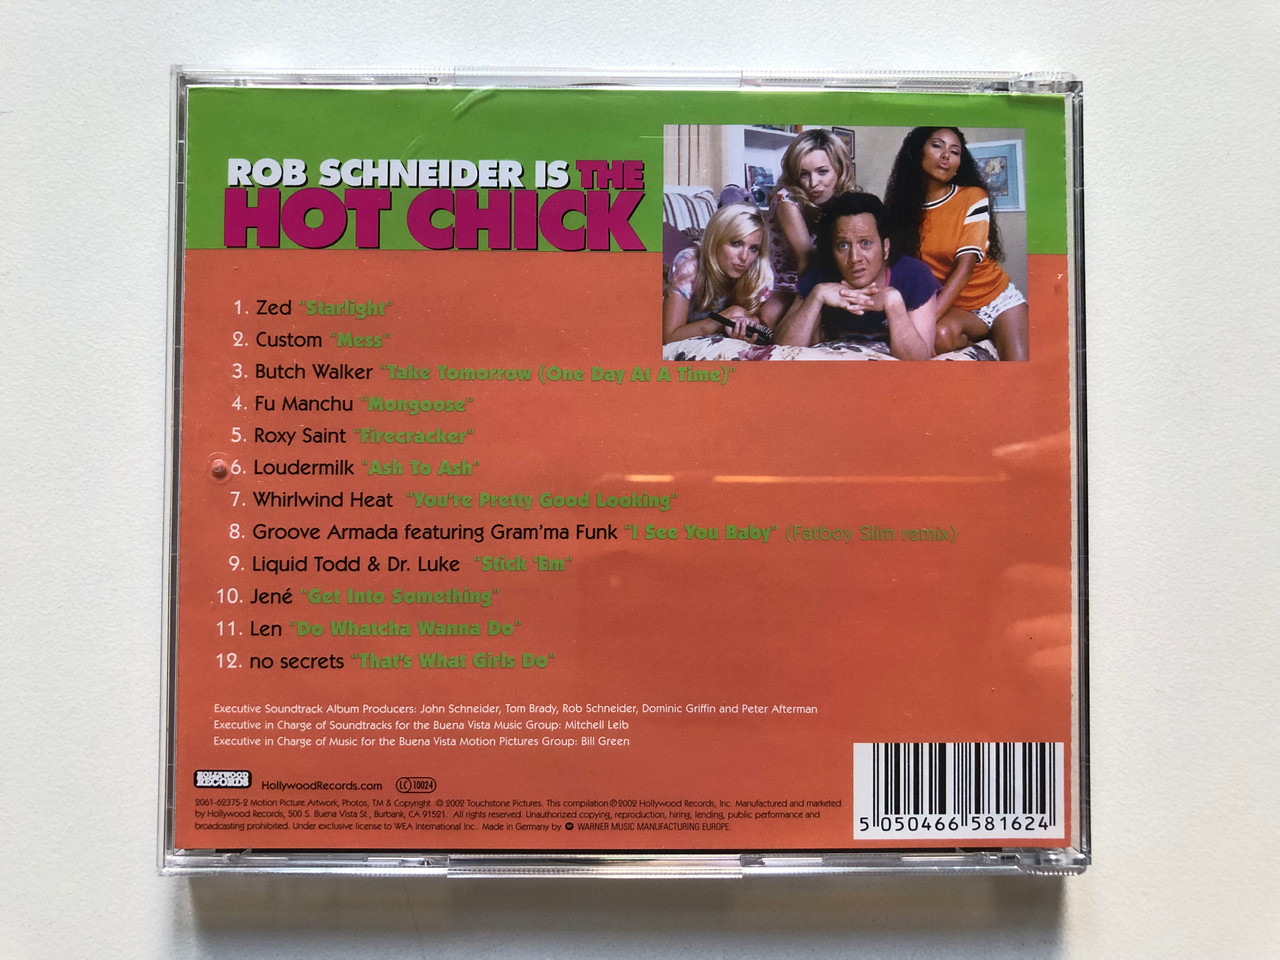 https://cdn10.bigcommerce.com/s-62bdpkt7pb/products/0/images/307504/Rob_Schneider_Is_The_Hot_Chick_Original_Soundtrack_Hollywood_Records_Audio_CD_2002_5050466-5816-2-4_2__49398.1698729485.1280.1280.JPG?c=2